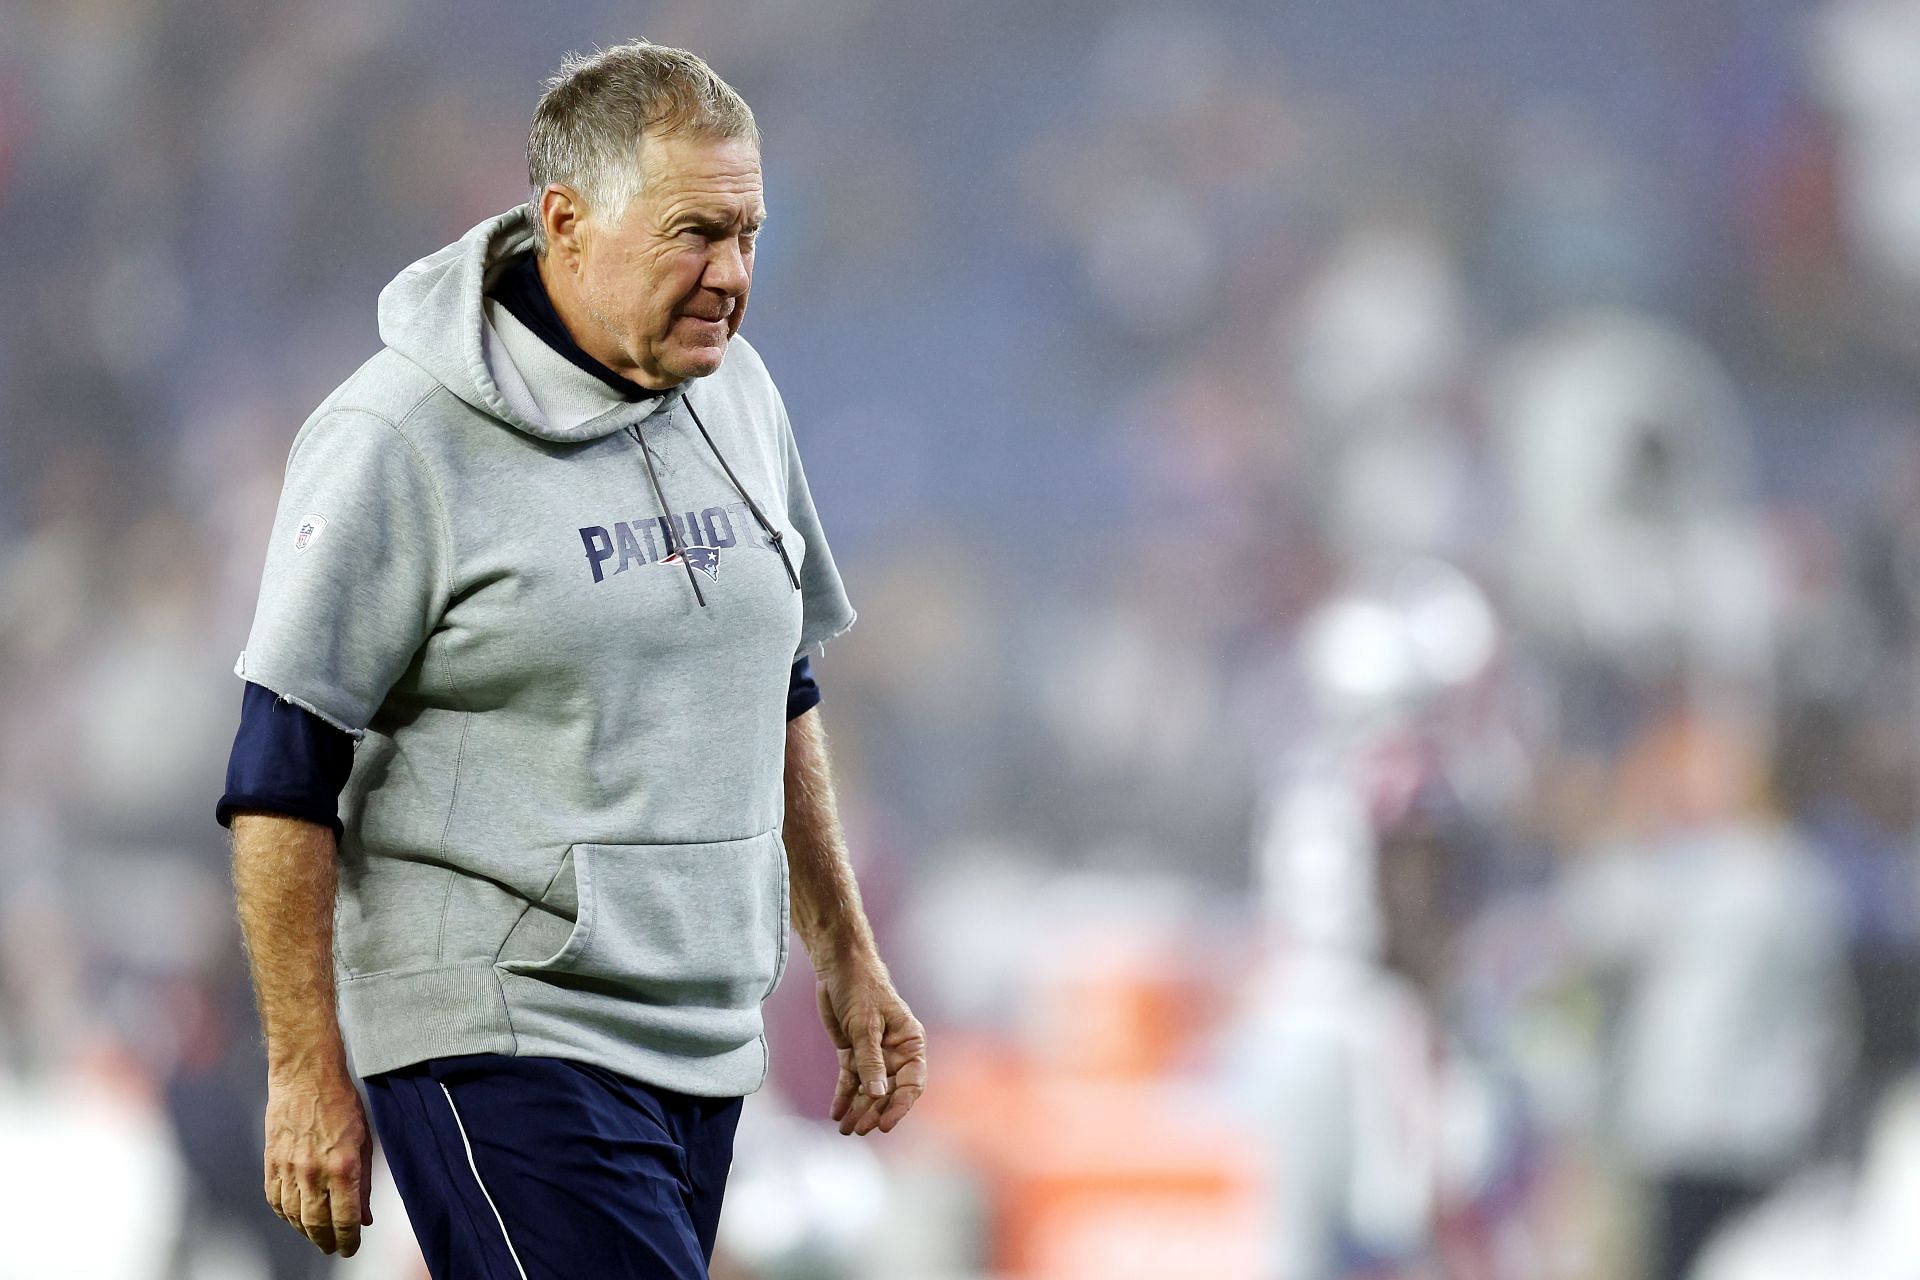 “He f****d us” – Source claims Bill Belichick responsible for failed Patriots season